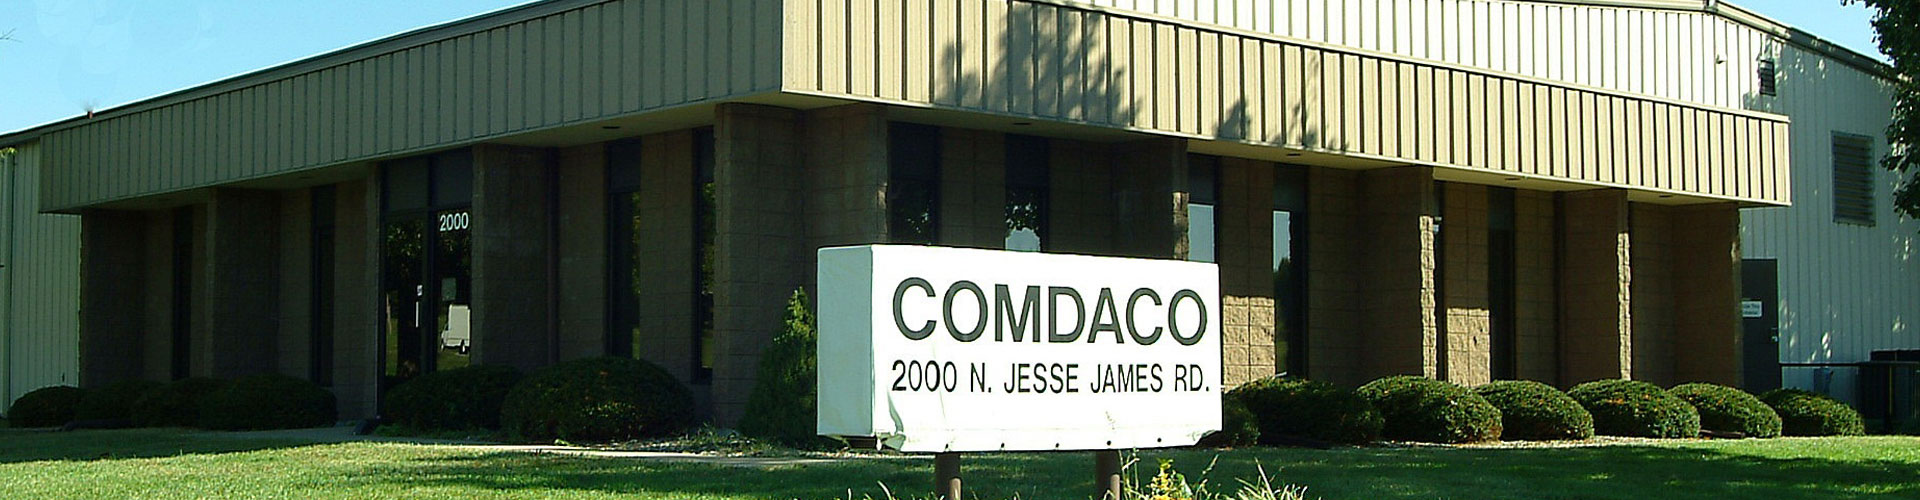 Terms and Conditions of Sale for Comdaco Rubber Manufacturing Services in Kansas City Missouri